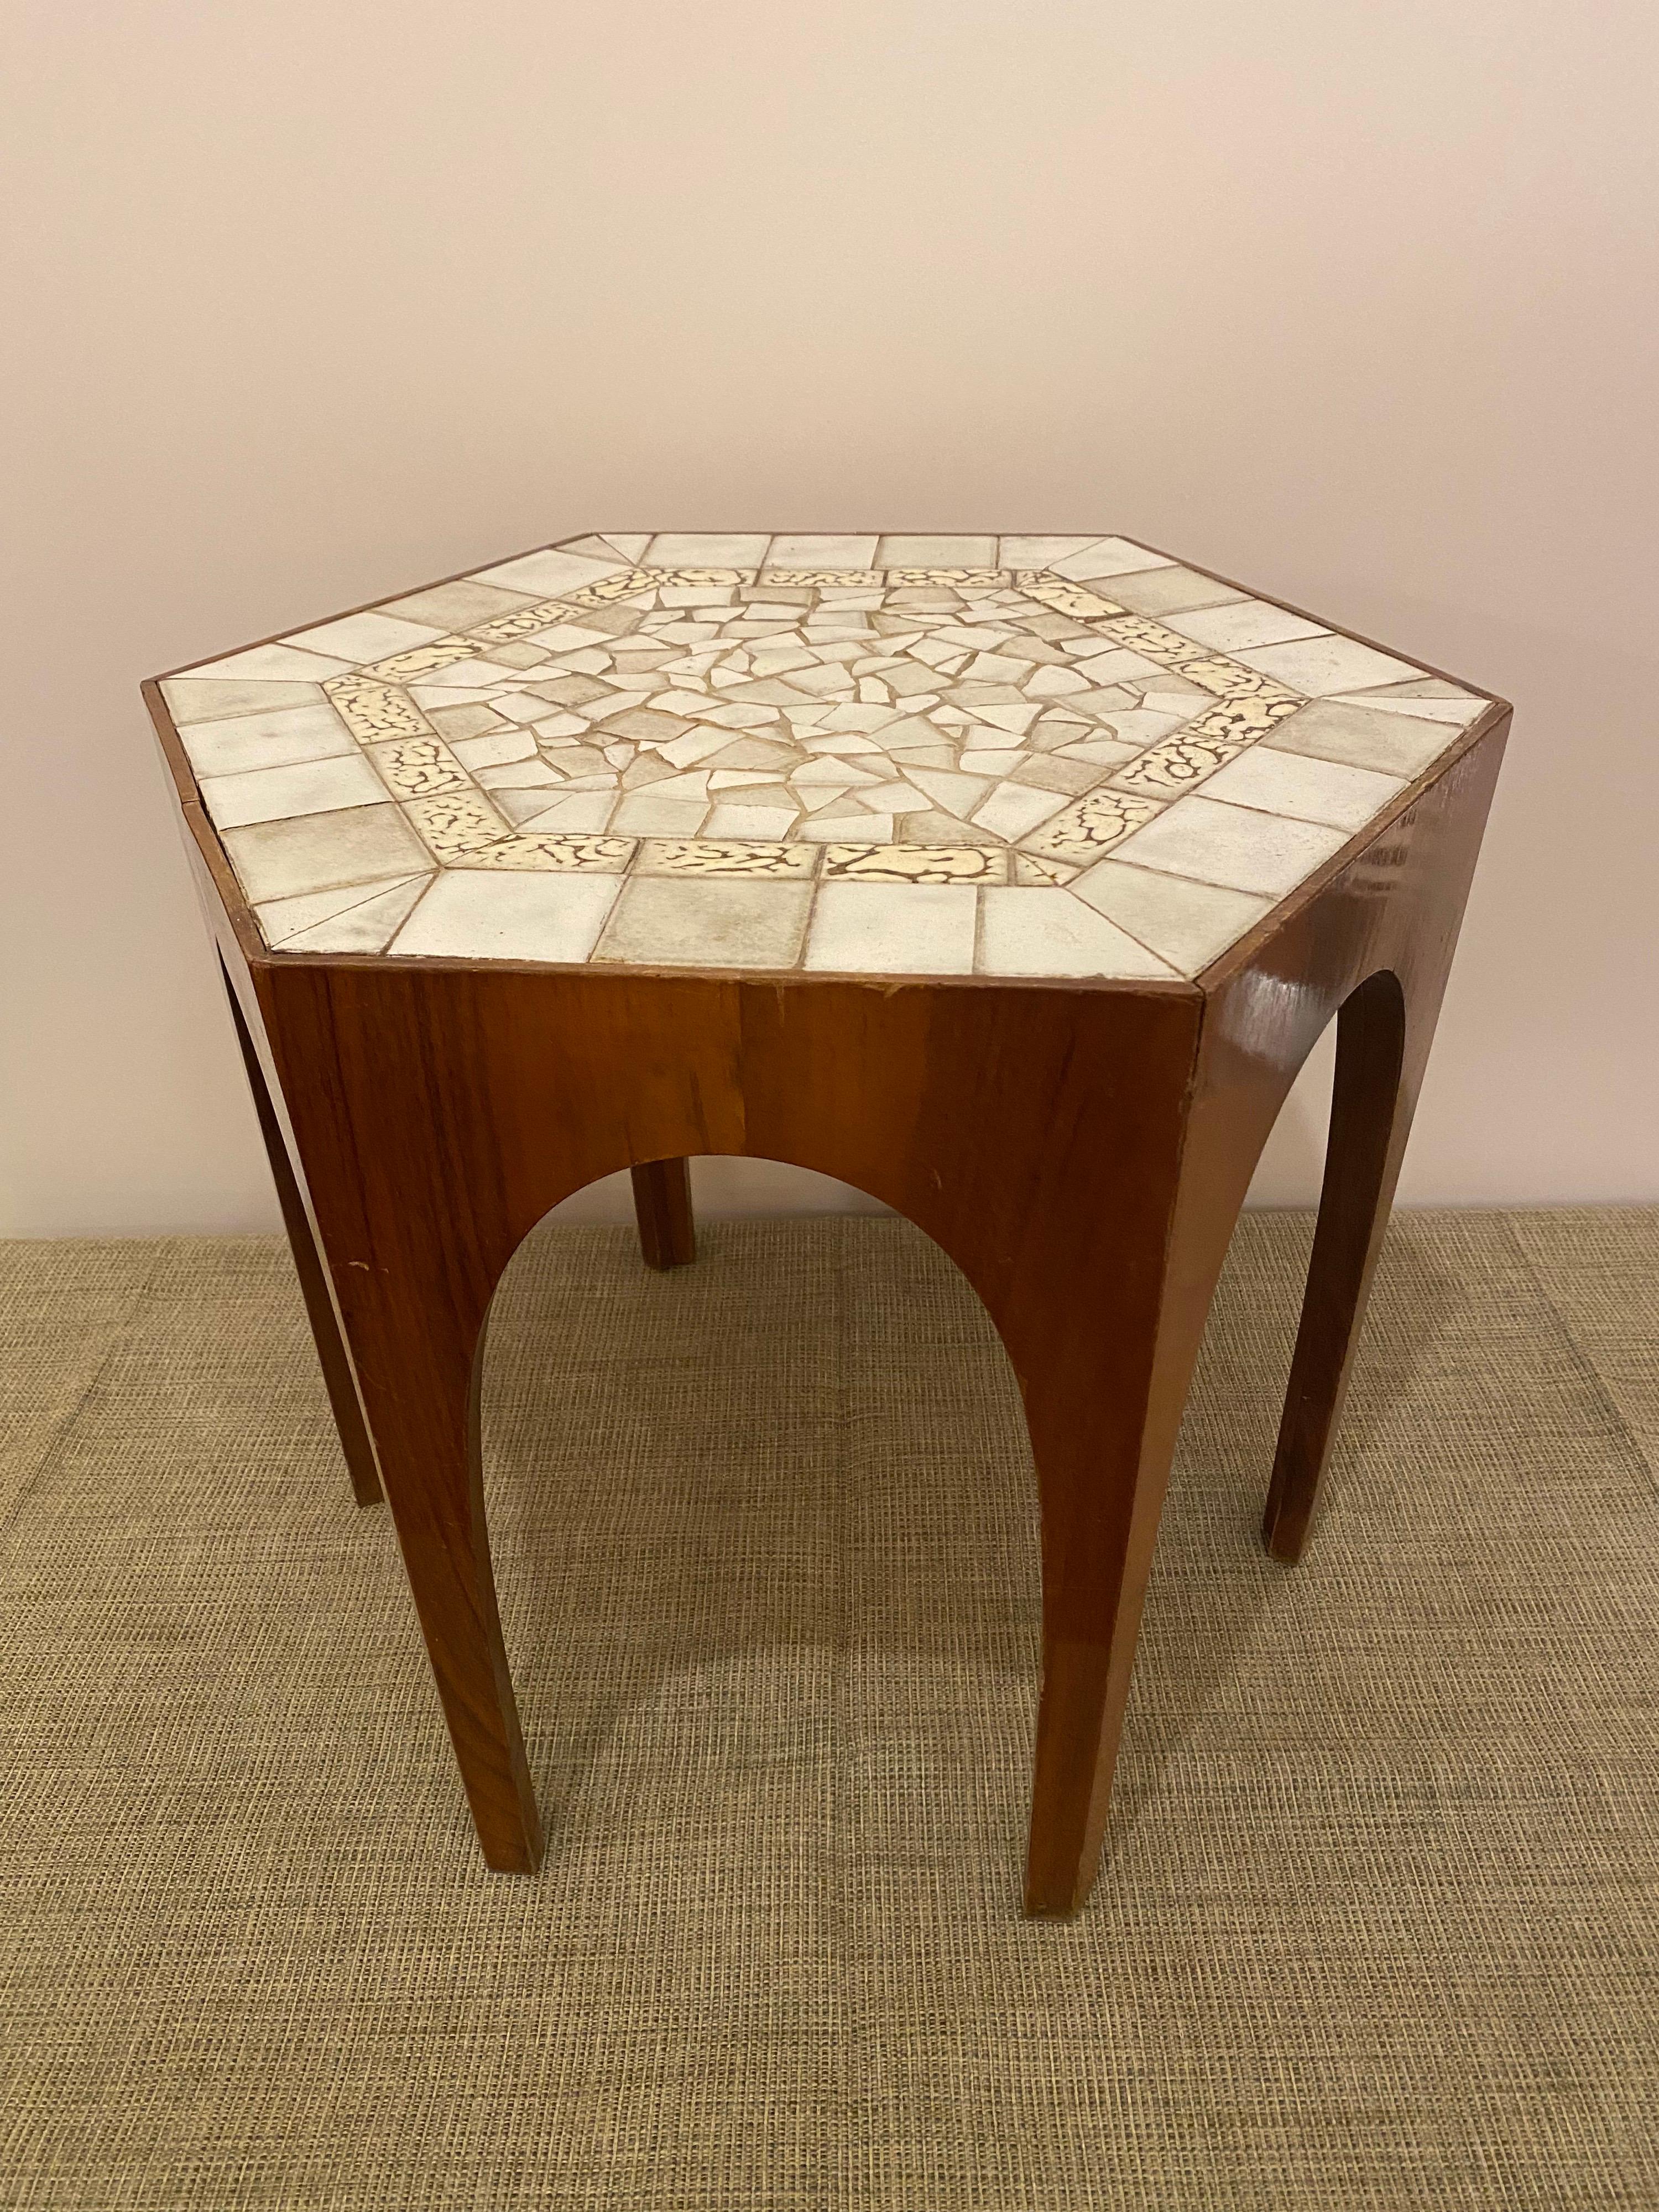 Italian mahogany hexagonal tile top table. Retains Italian label to underside. Perfect size for multiple uses! Has a feel like some of the Harvey probber designs as well.